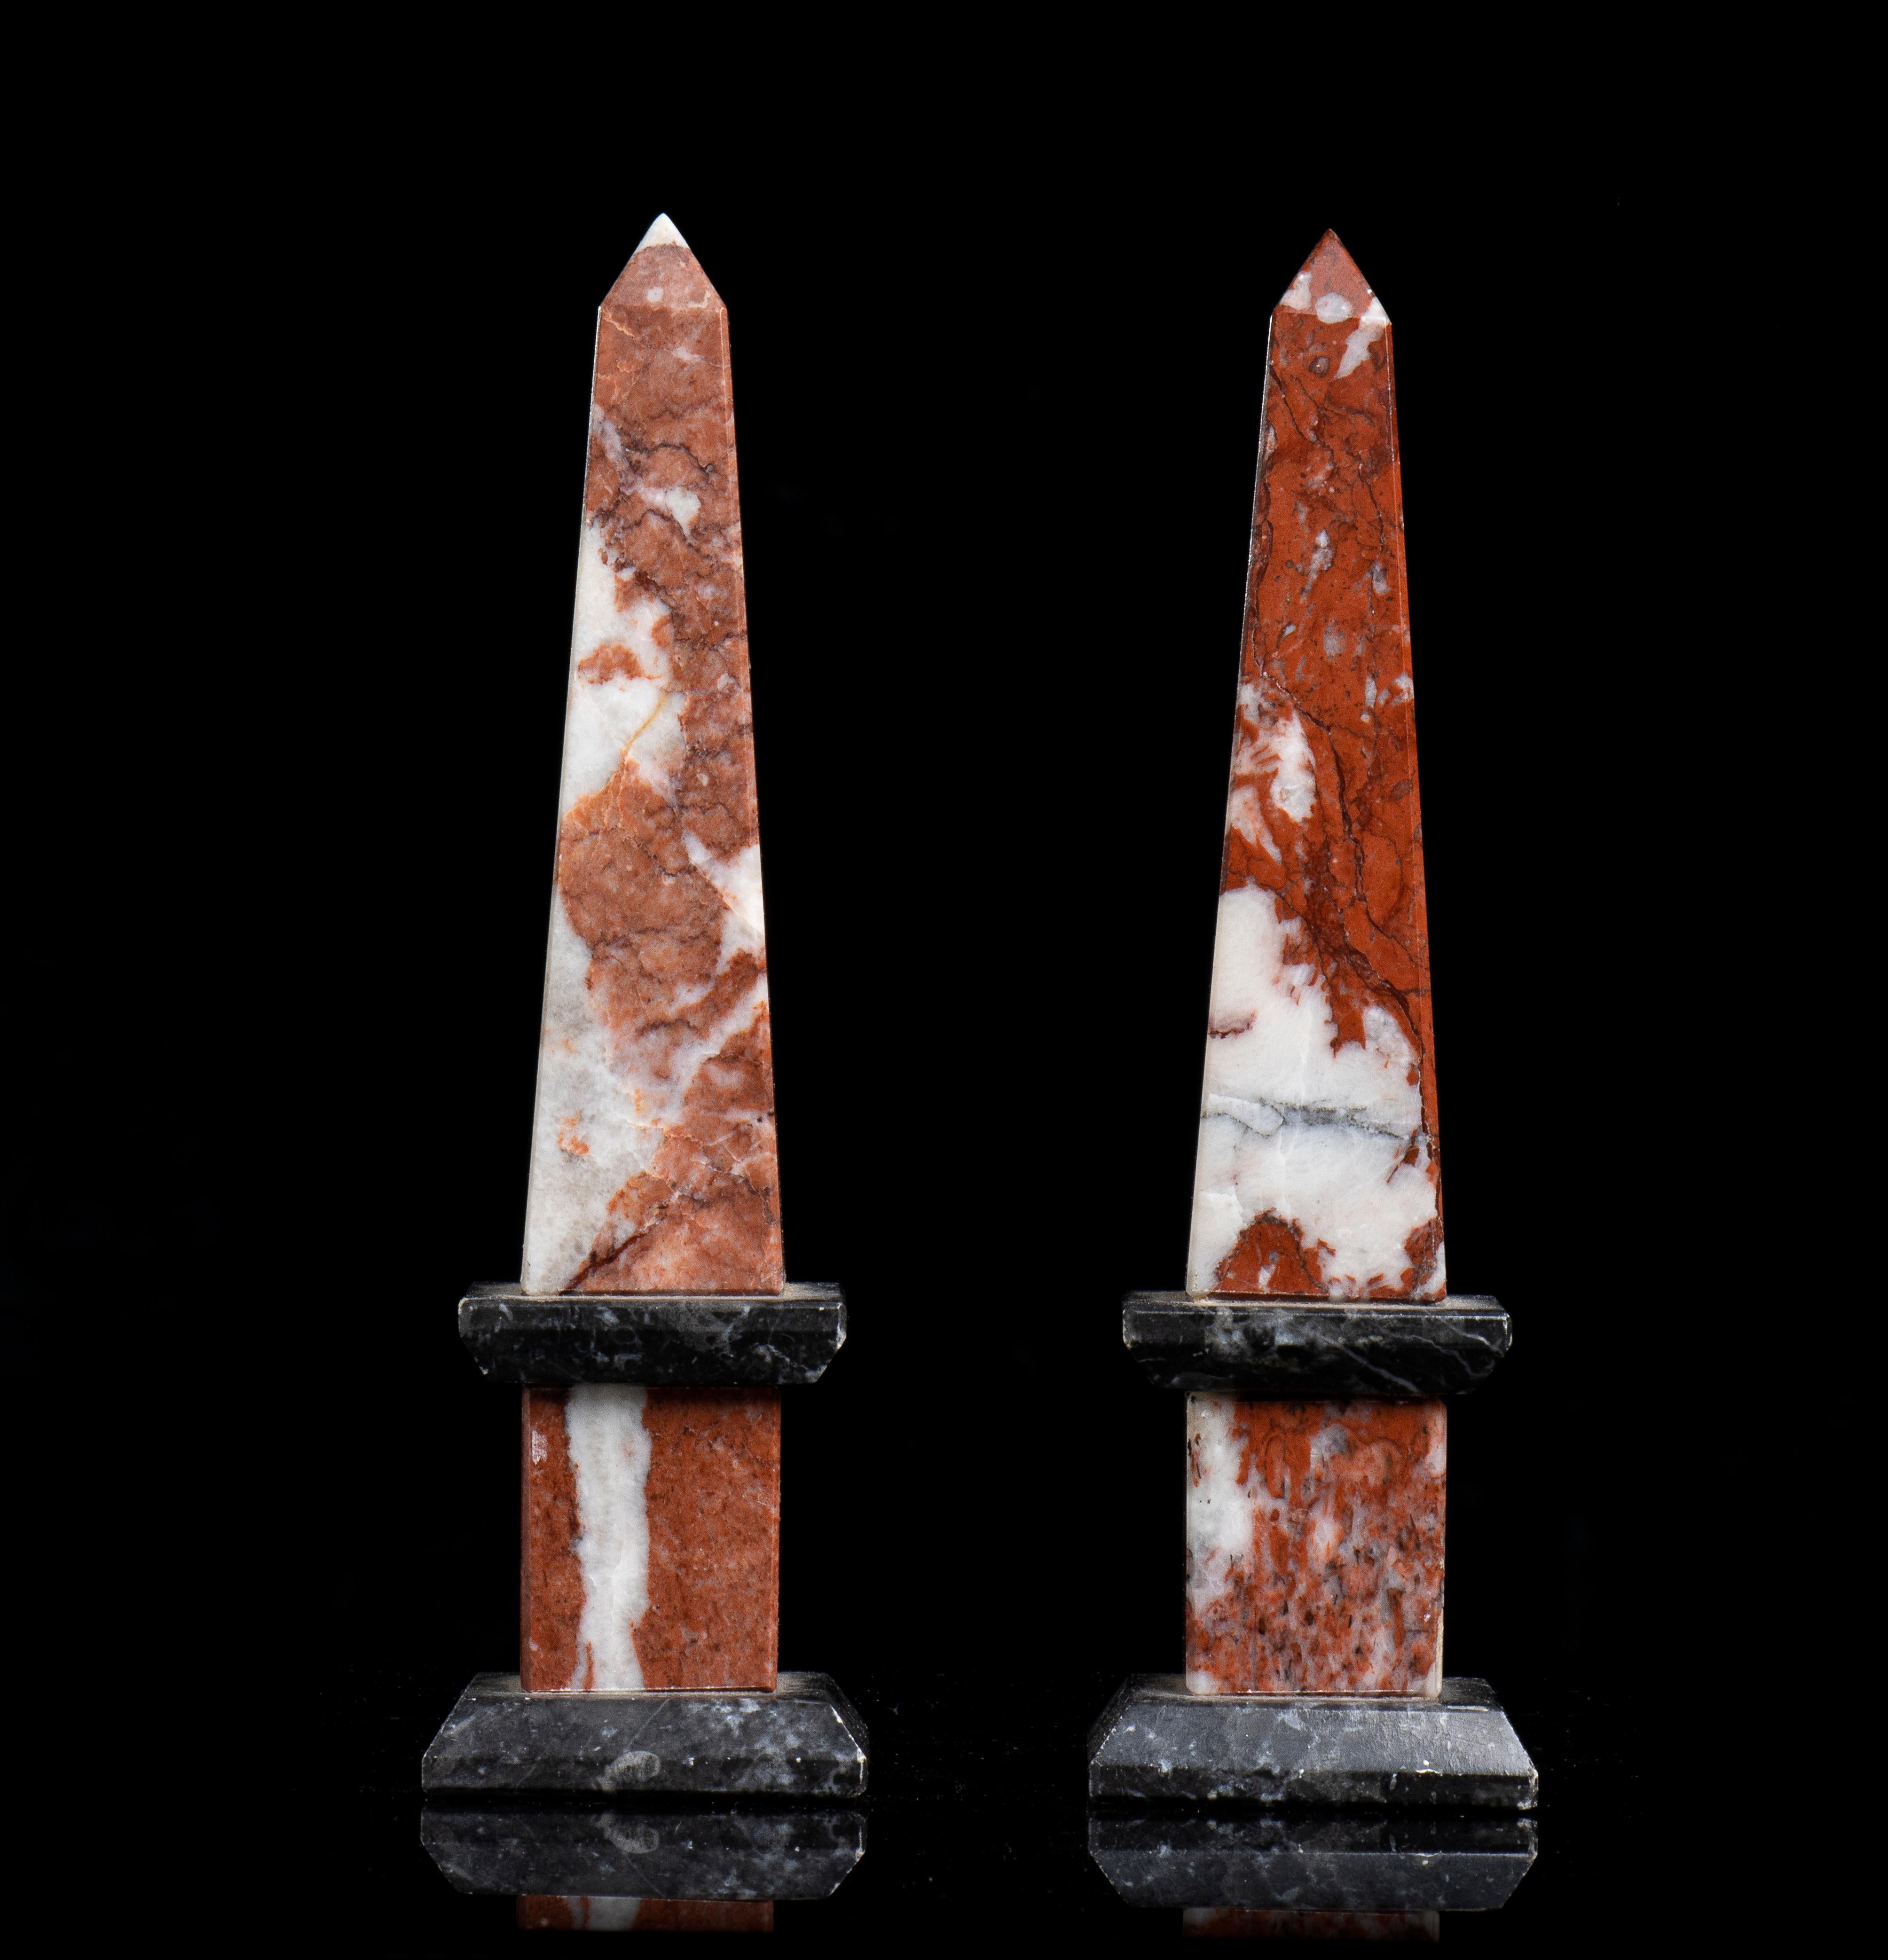 a very interesting and beautiful pair of obelisks carved in a warm and precious red marble the Red France Languedoc Incarnat, used for important and uinque decoration in the Versailles Palace and more notable sites; the obelisks framed with two